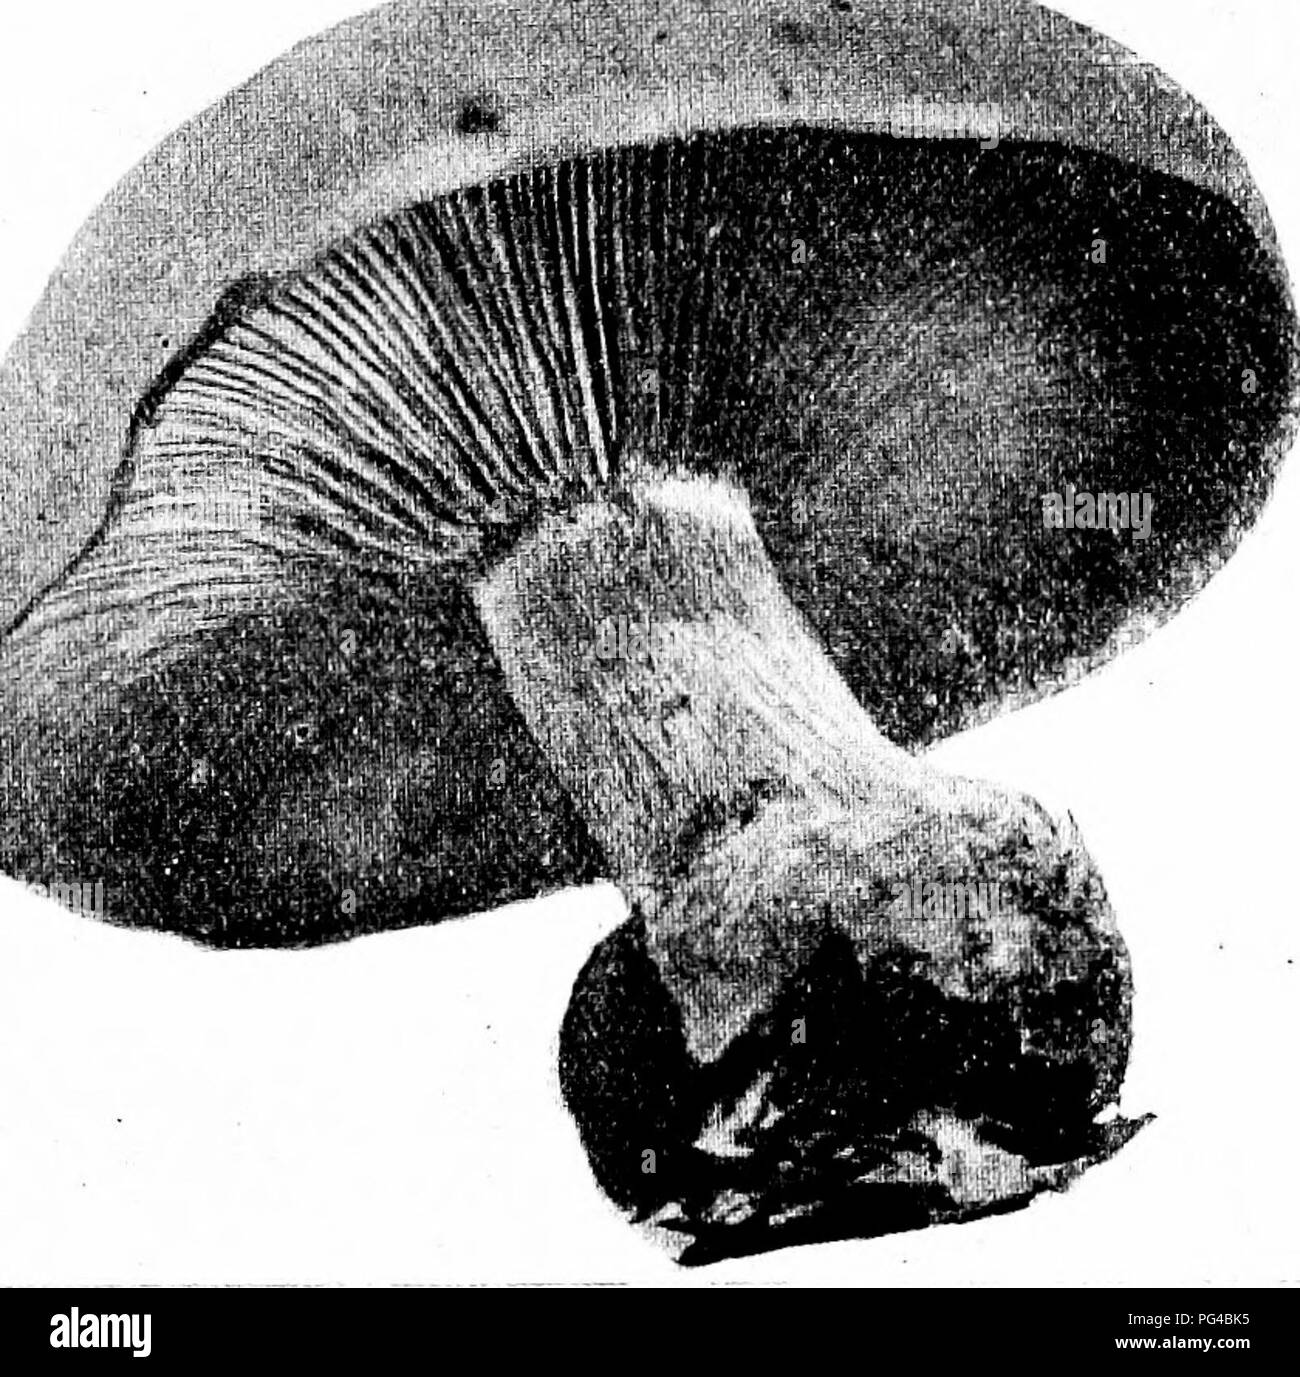 . Minnesota mushrooms ... Botany; Mushrooms. GILL FUNGI 19 Tricholoma terreum Earth Cap Plate I:2 Cap small, 2-8 cm. wide, gray-brown to mouse-colored, covered with close scales or fibers, often closer and concentric toward the disk, bell-shaped or convex, rarely plane; stem short, 2-5 cm., paler than the cap, with fibers, solid to hollow; gills adnexed, whitish or gray, the edge more or less toothed; spores globose to elliptic, 5-7 X -l-f'^- The name refers to the earthy color and appearance of the cap. On the ground in woods, especially in the needle mold at the base of spruces and firs ; ed Stock Photo